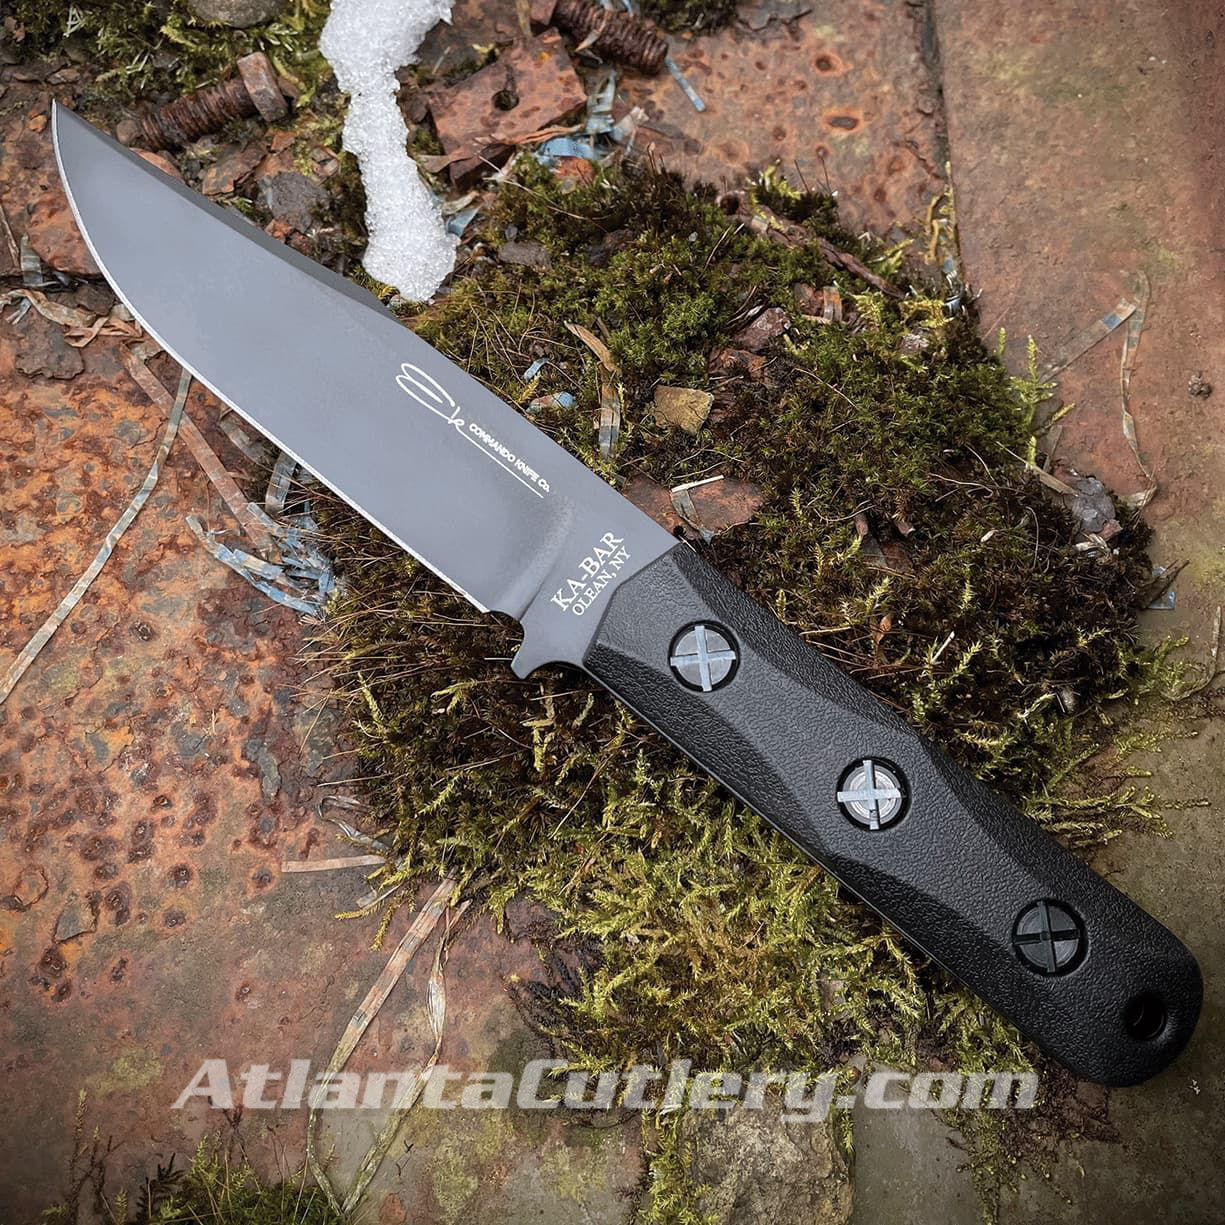 Ek50 Commando Short Clip Point Fighting Knife made in the USA, 1095 Cro-Van steel blade with an integral finger guard